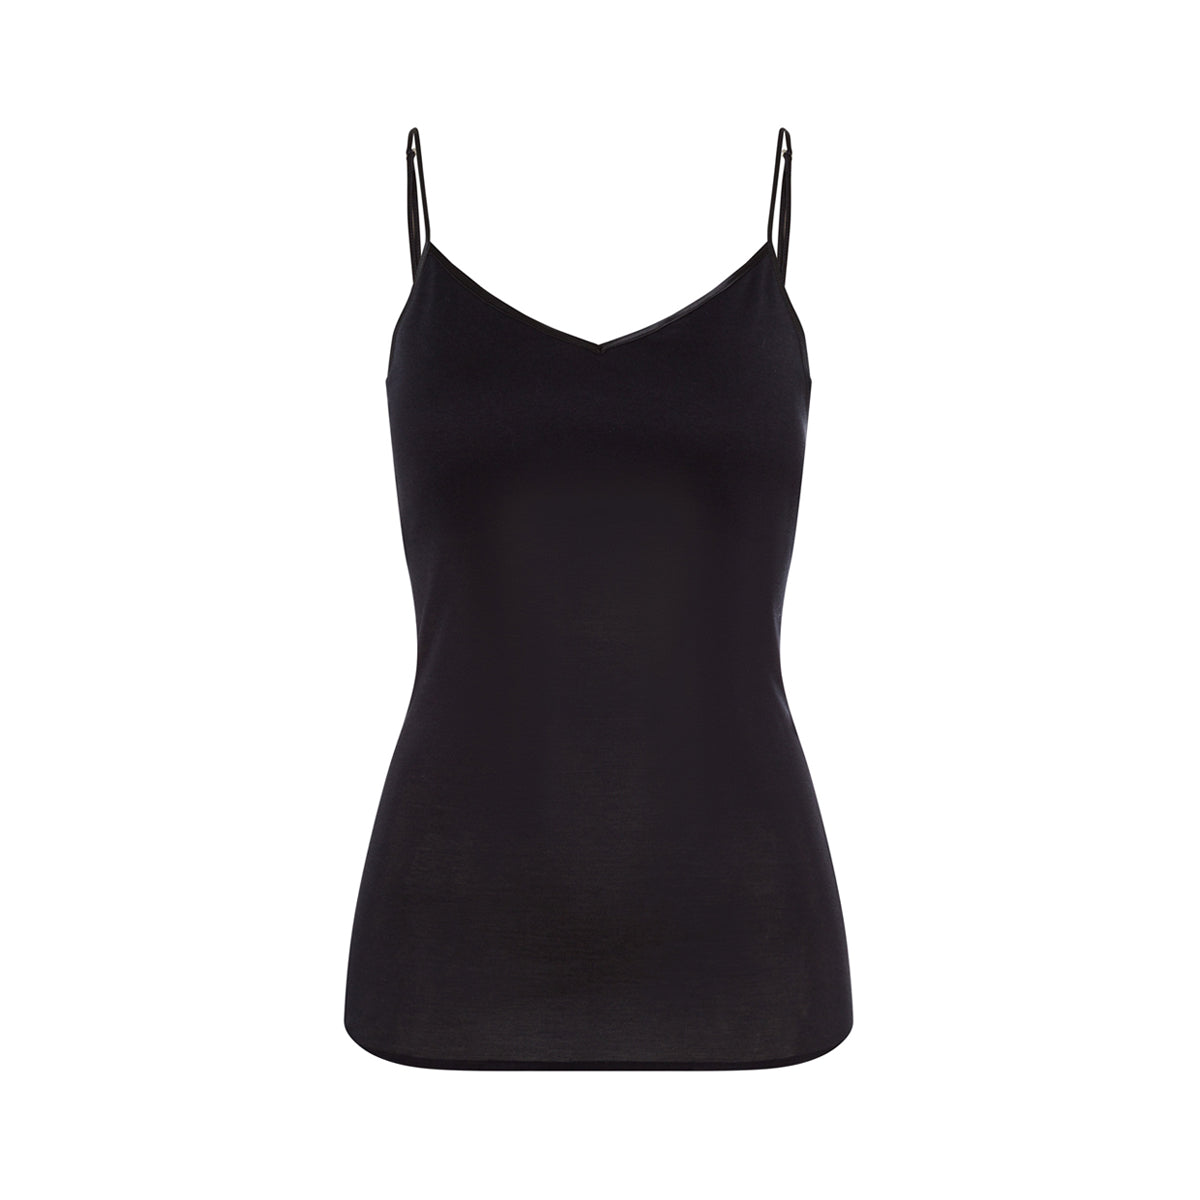 Buy Beau Design Black Colour Solid Padded Bra Camisole Online at